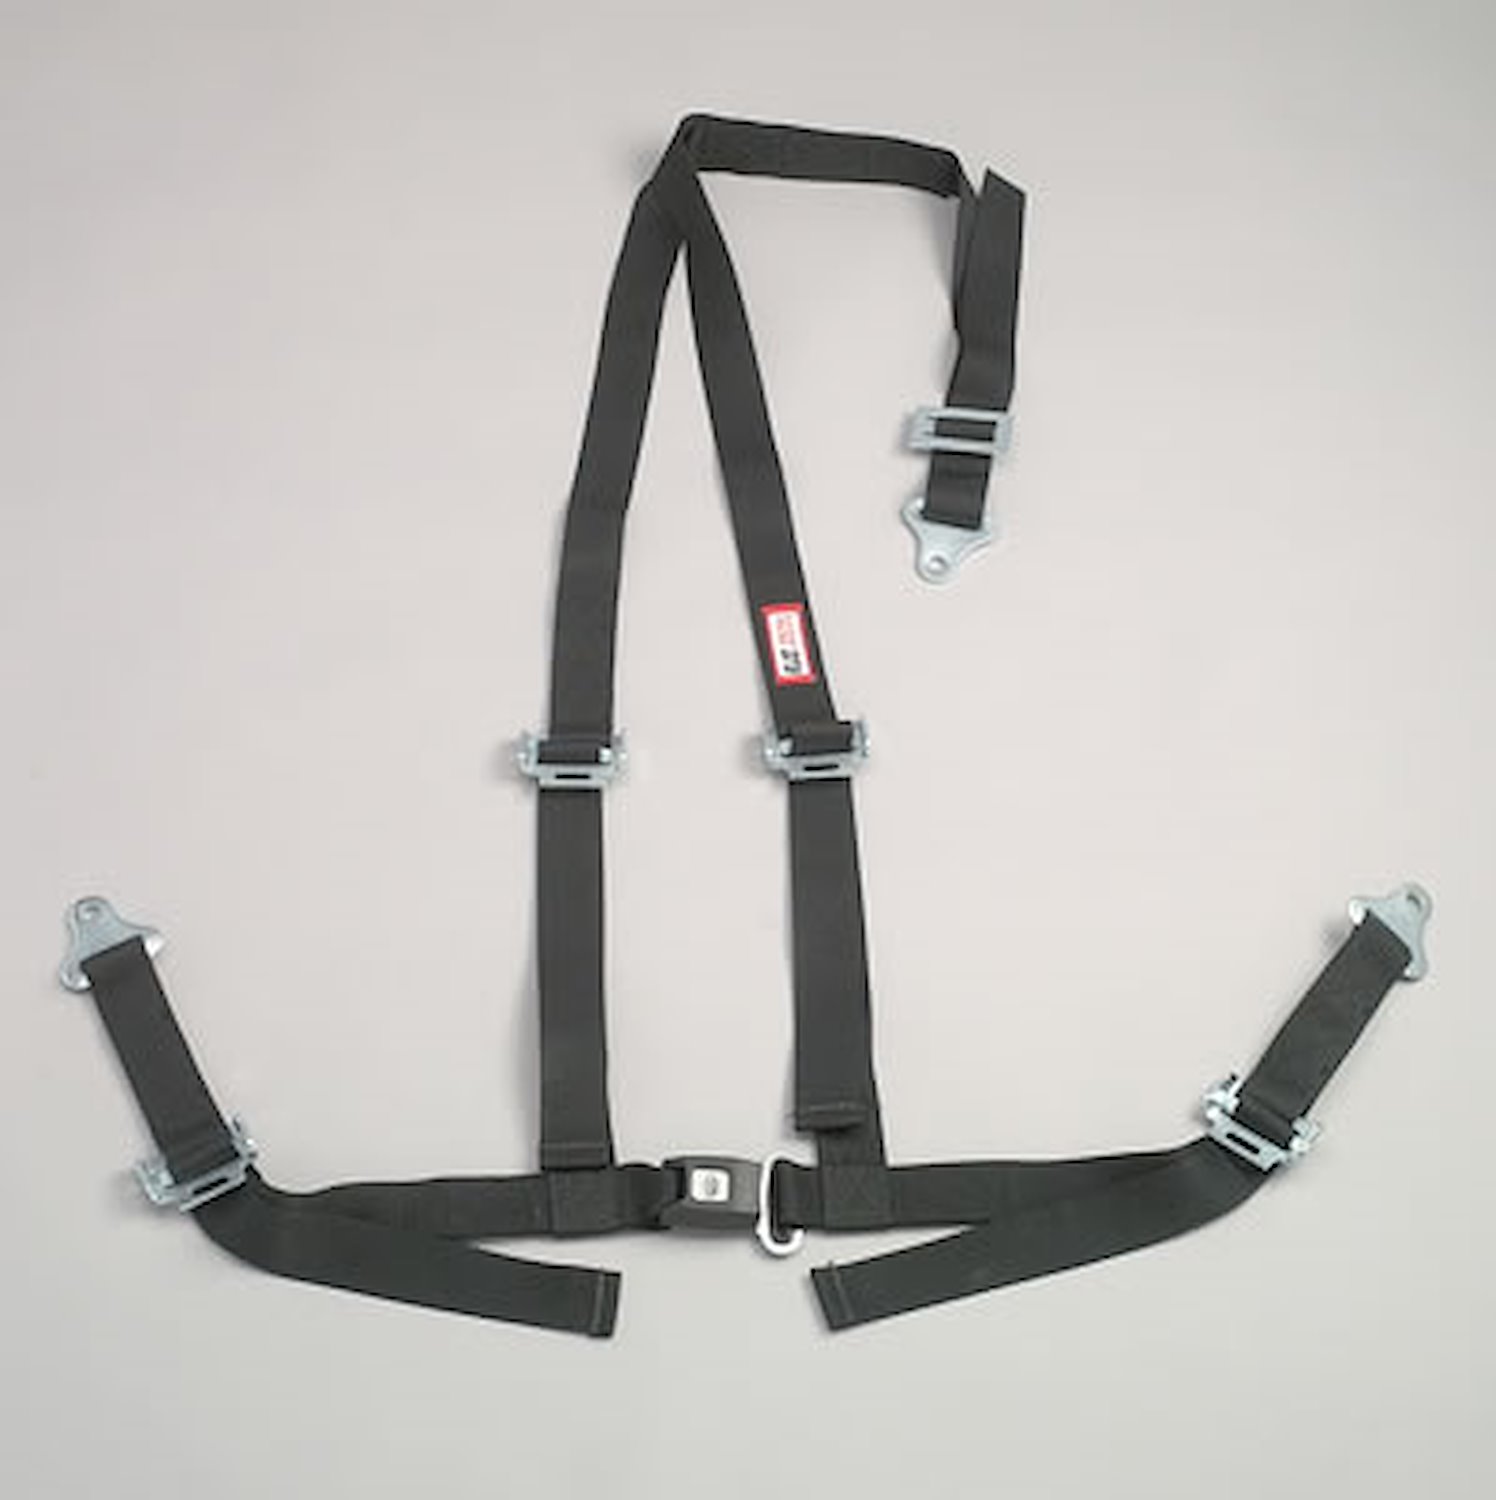 NON-SFI B&T HARNESS 2 PULL DOWN Lap Belt SNAP 2 S.H. INDIVIDUAL FLOOR Mount WRAP/SNAP RED